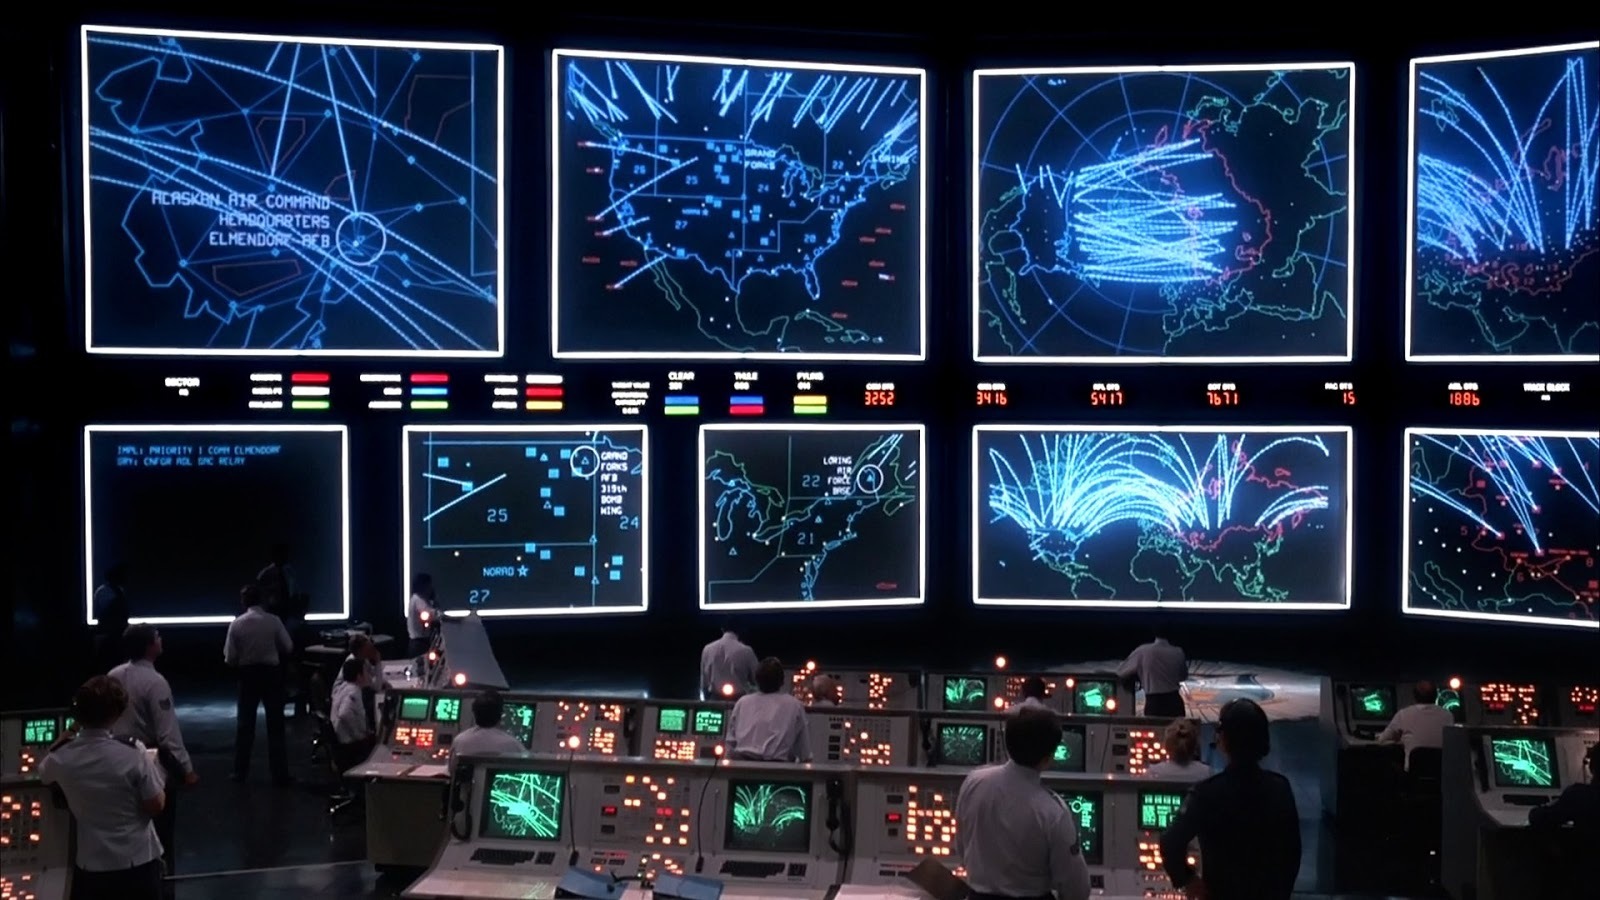 Nuclear war command center from the 1983 movie “War Games” in which an intelligent computer learns "the only winning move is not to play."